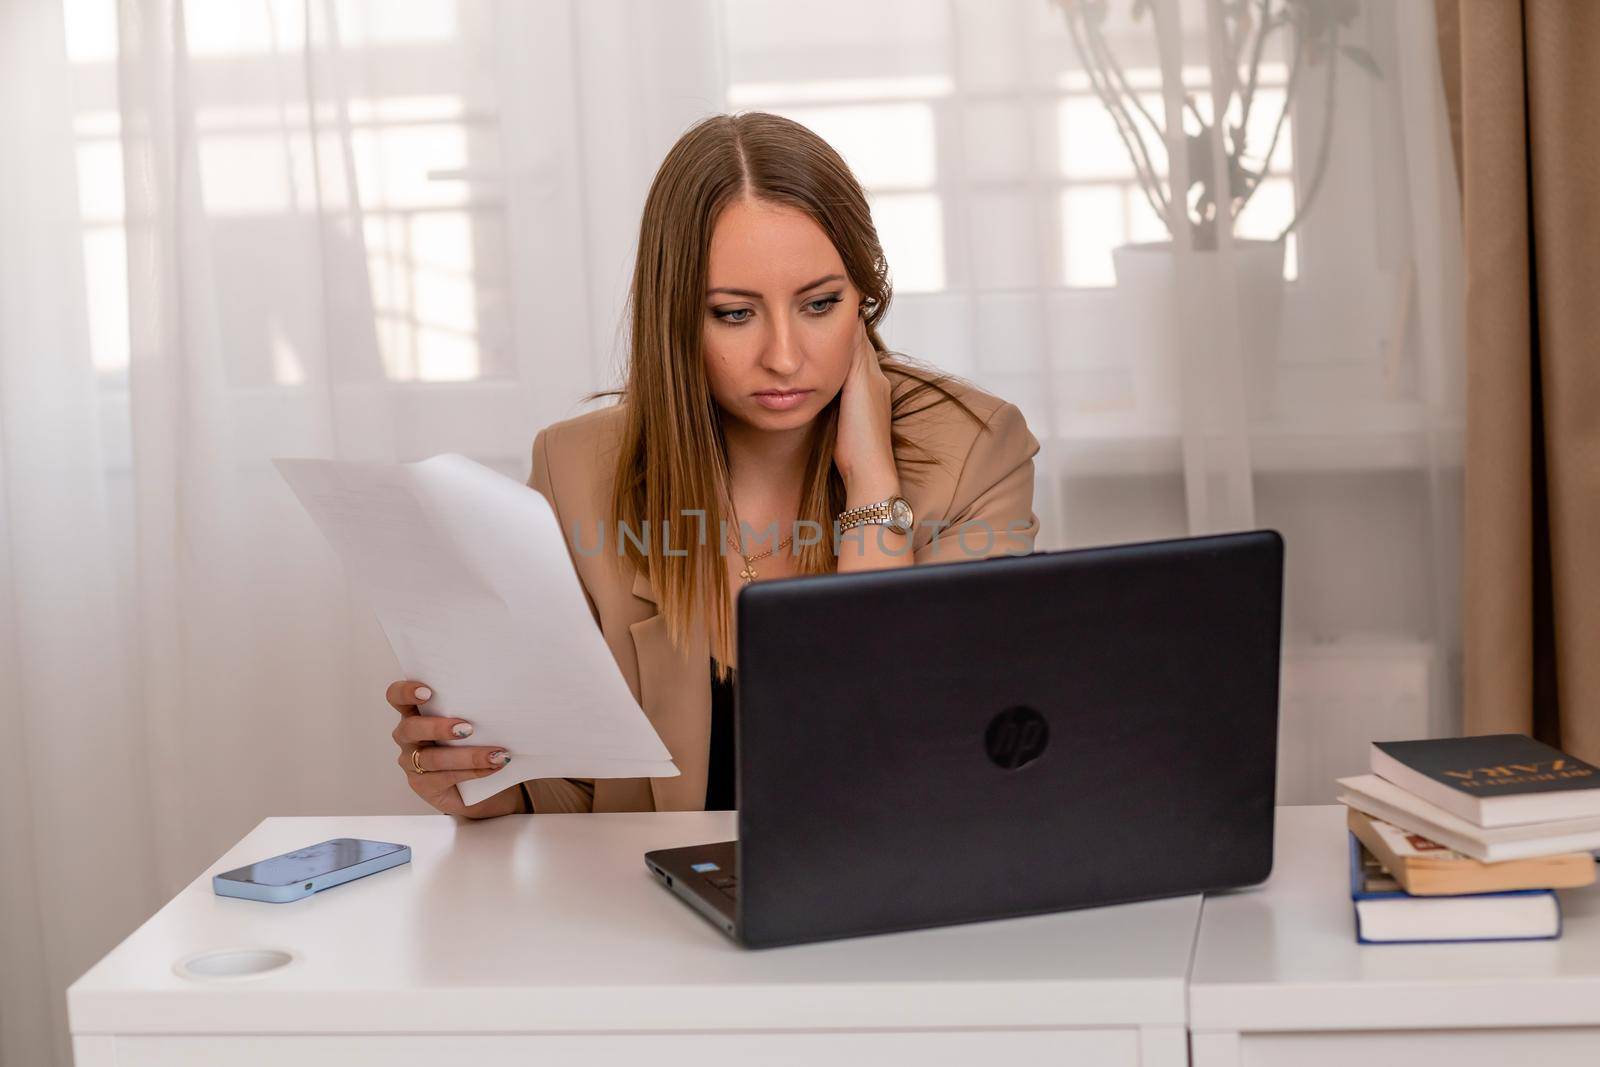 European professional woman sitting with laptop at home office desk, positive woman studying while working on PC. She is wearing a beige jacket and jeans. by Matiunina